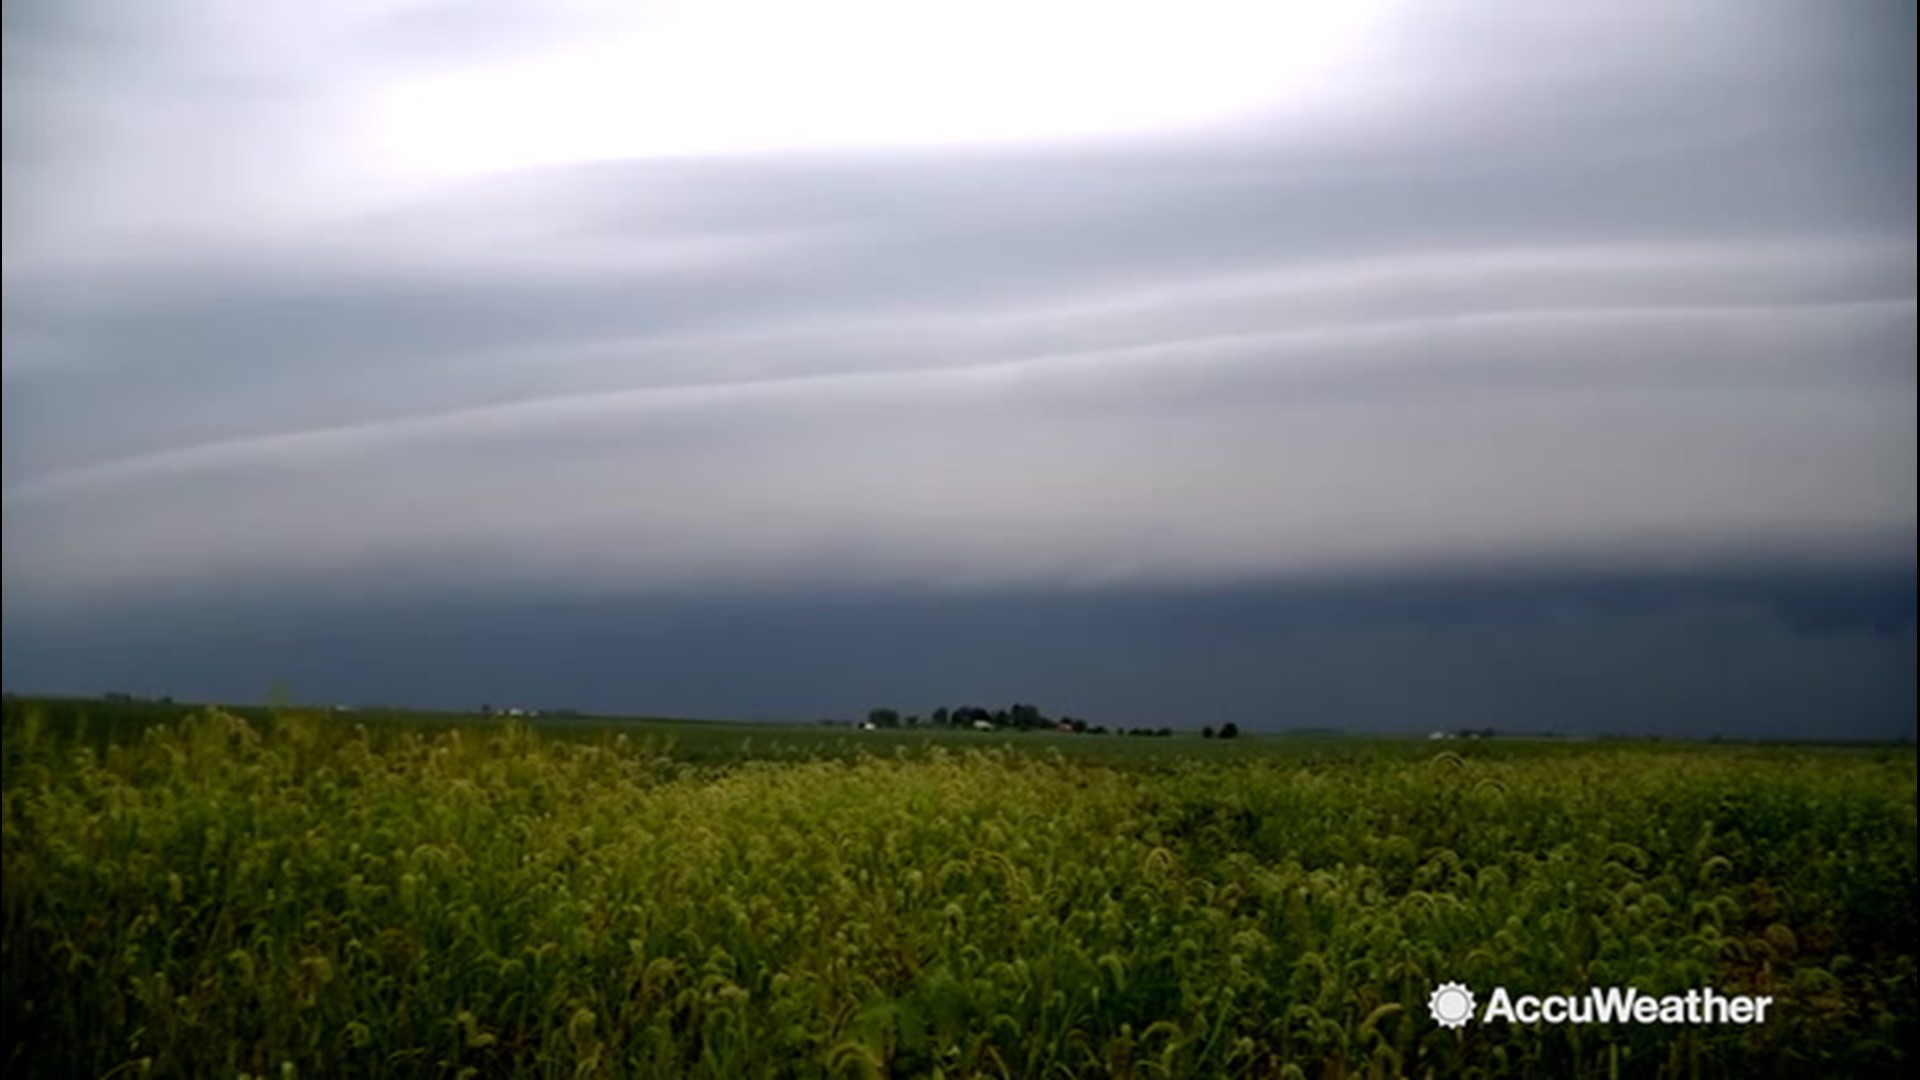 AccuWeather reporter Blake Naftel was in Westpoint, Indiana, where he captured this impressive shelf cloud that formed ahead of a thunderstorm on Aug. 20.